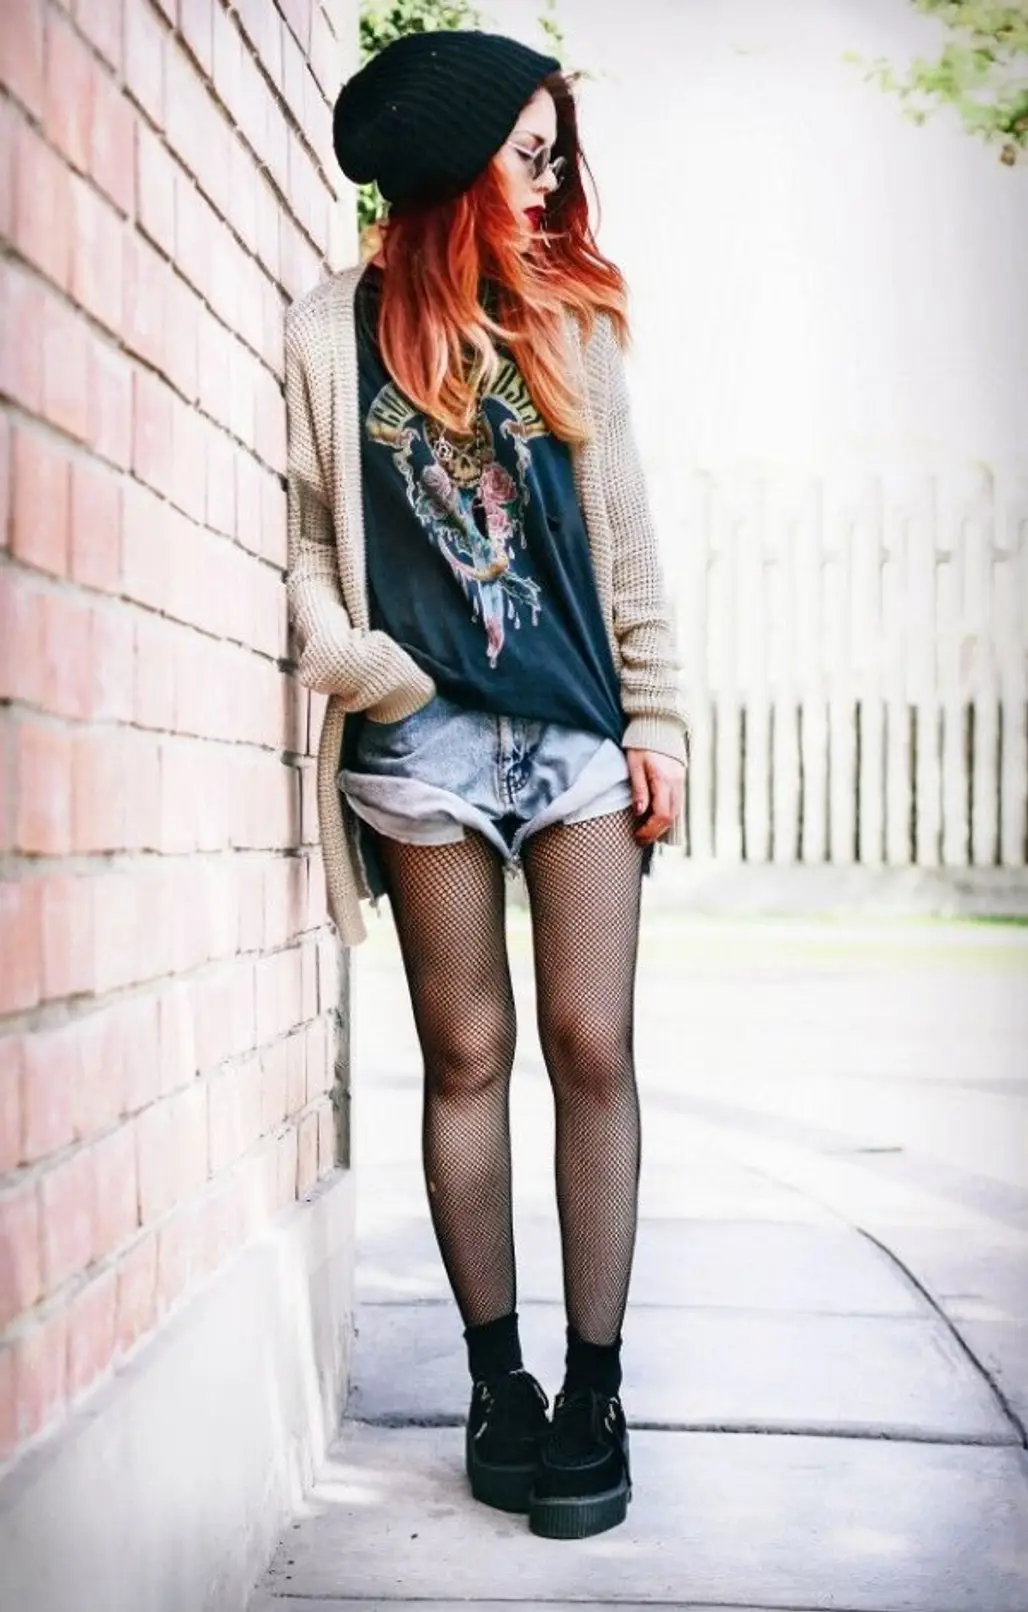 High Waisted Fishnet Tights - Black  Teenage fashion outfits, Fashion  outfits, Dream clothes